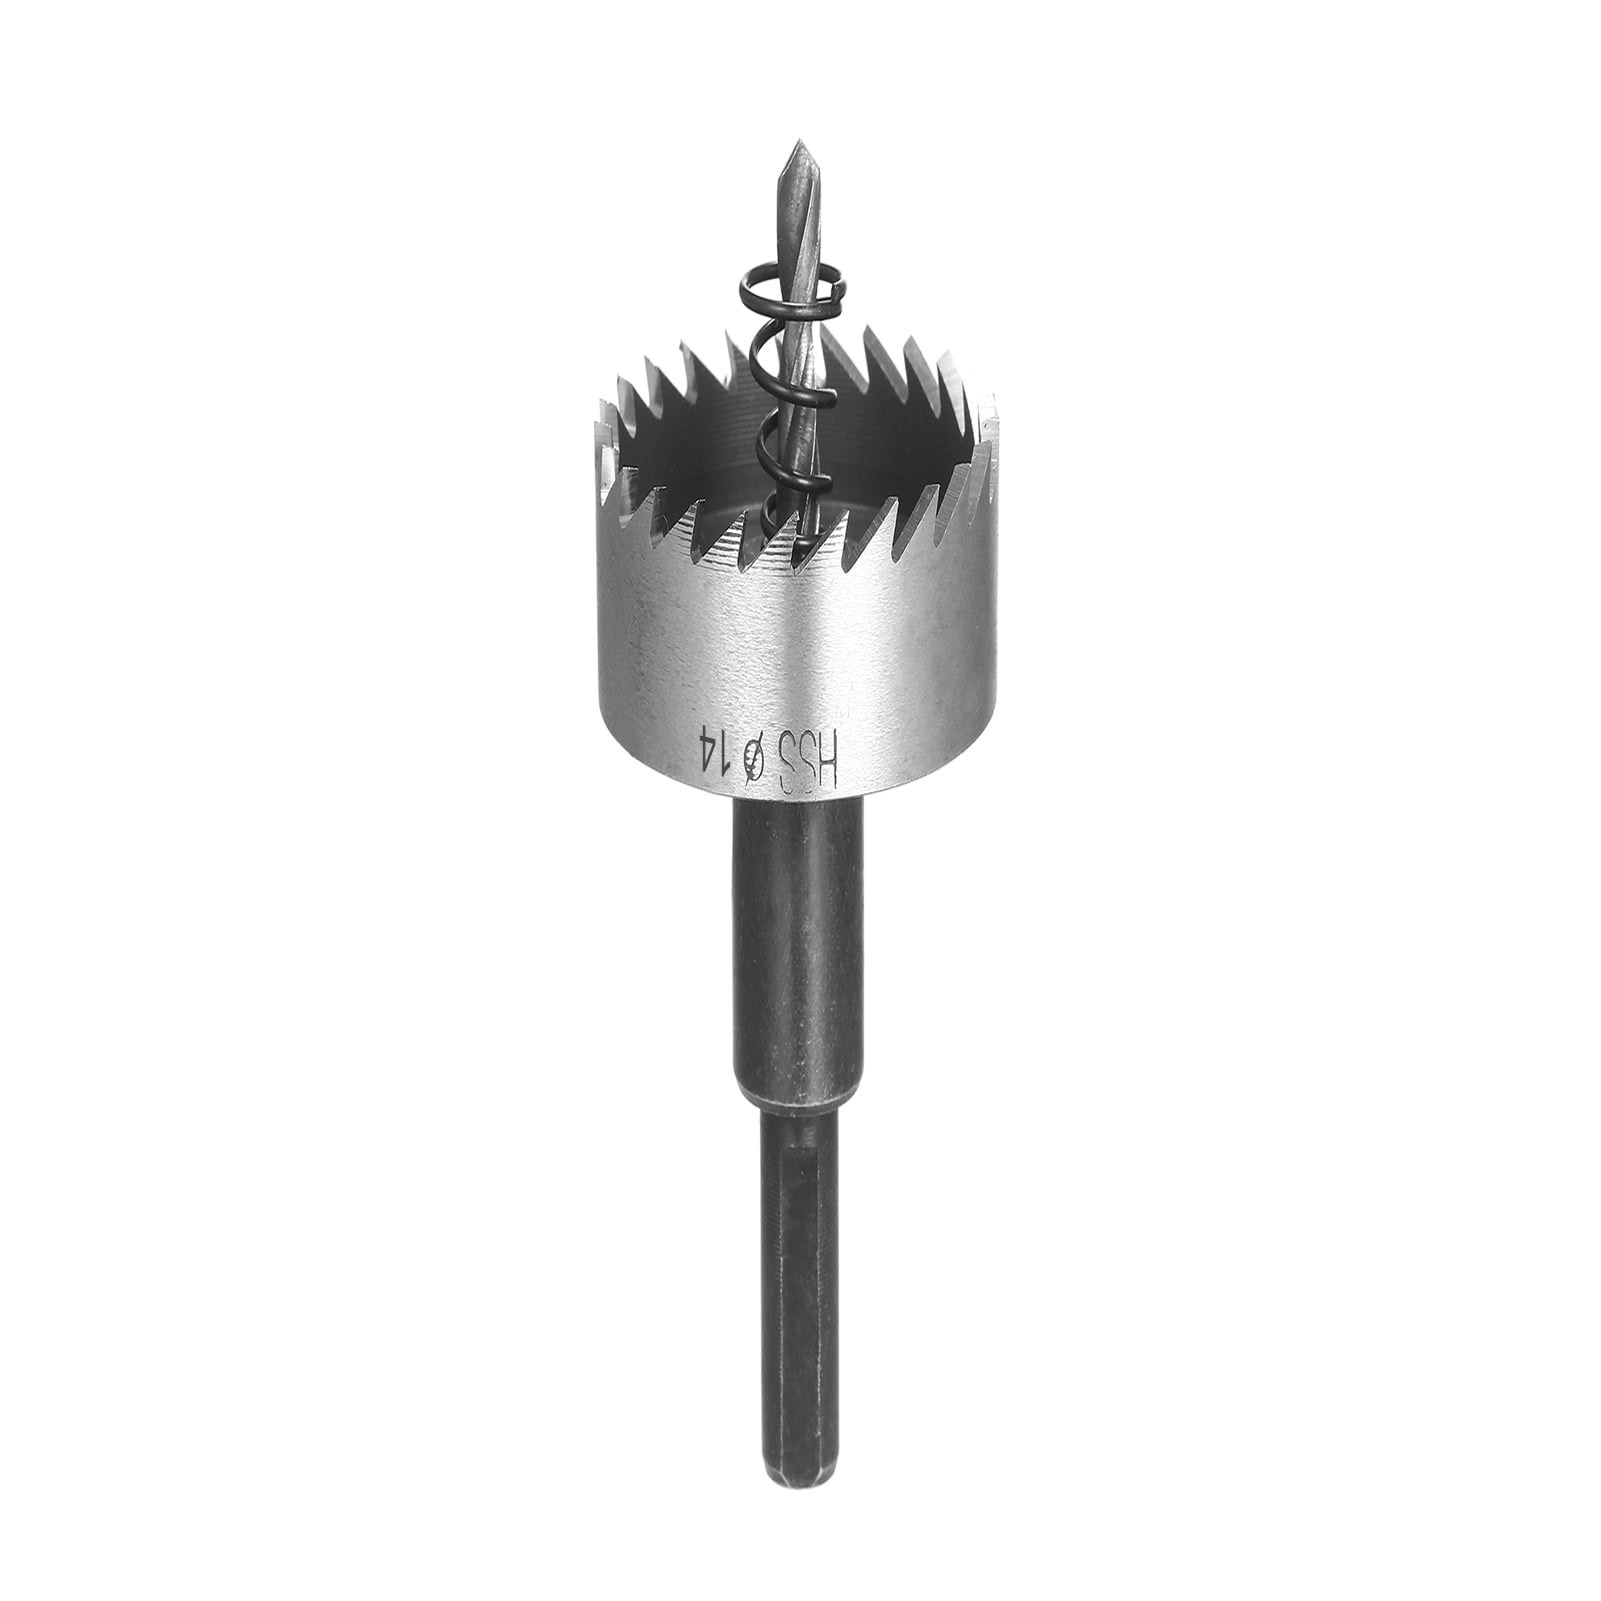 12-35mm HSS Blacksmith Reduced Shank Drill Bits For Metal Stainless Steel Wood 